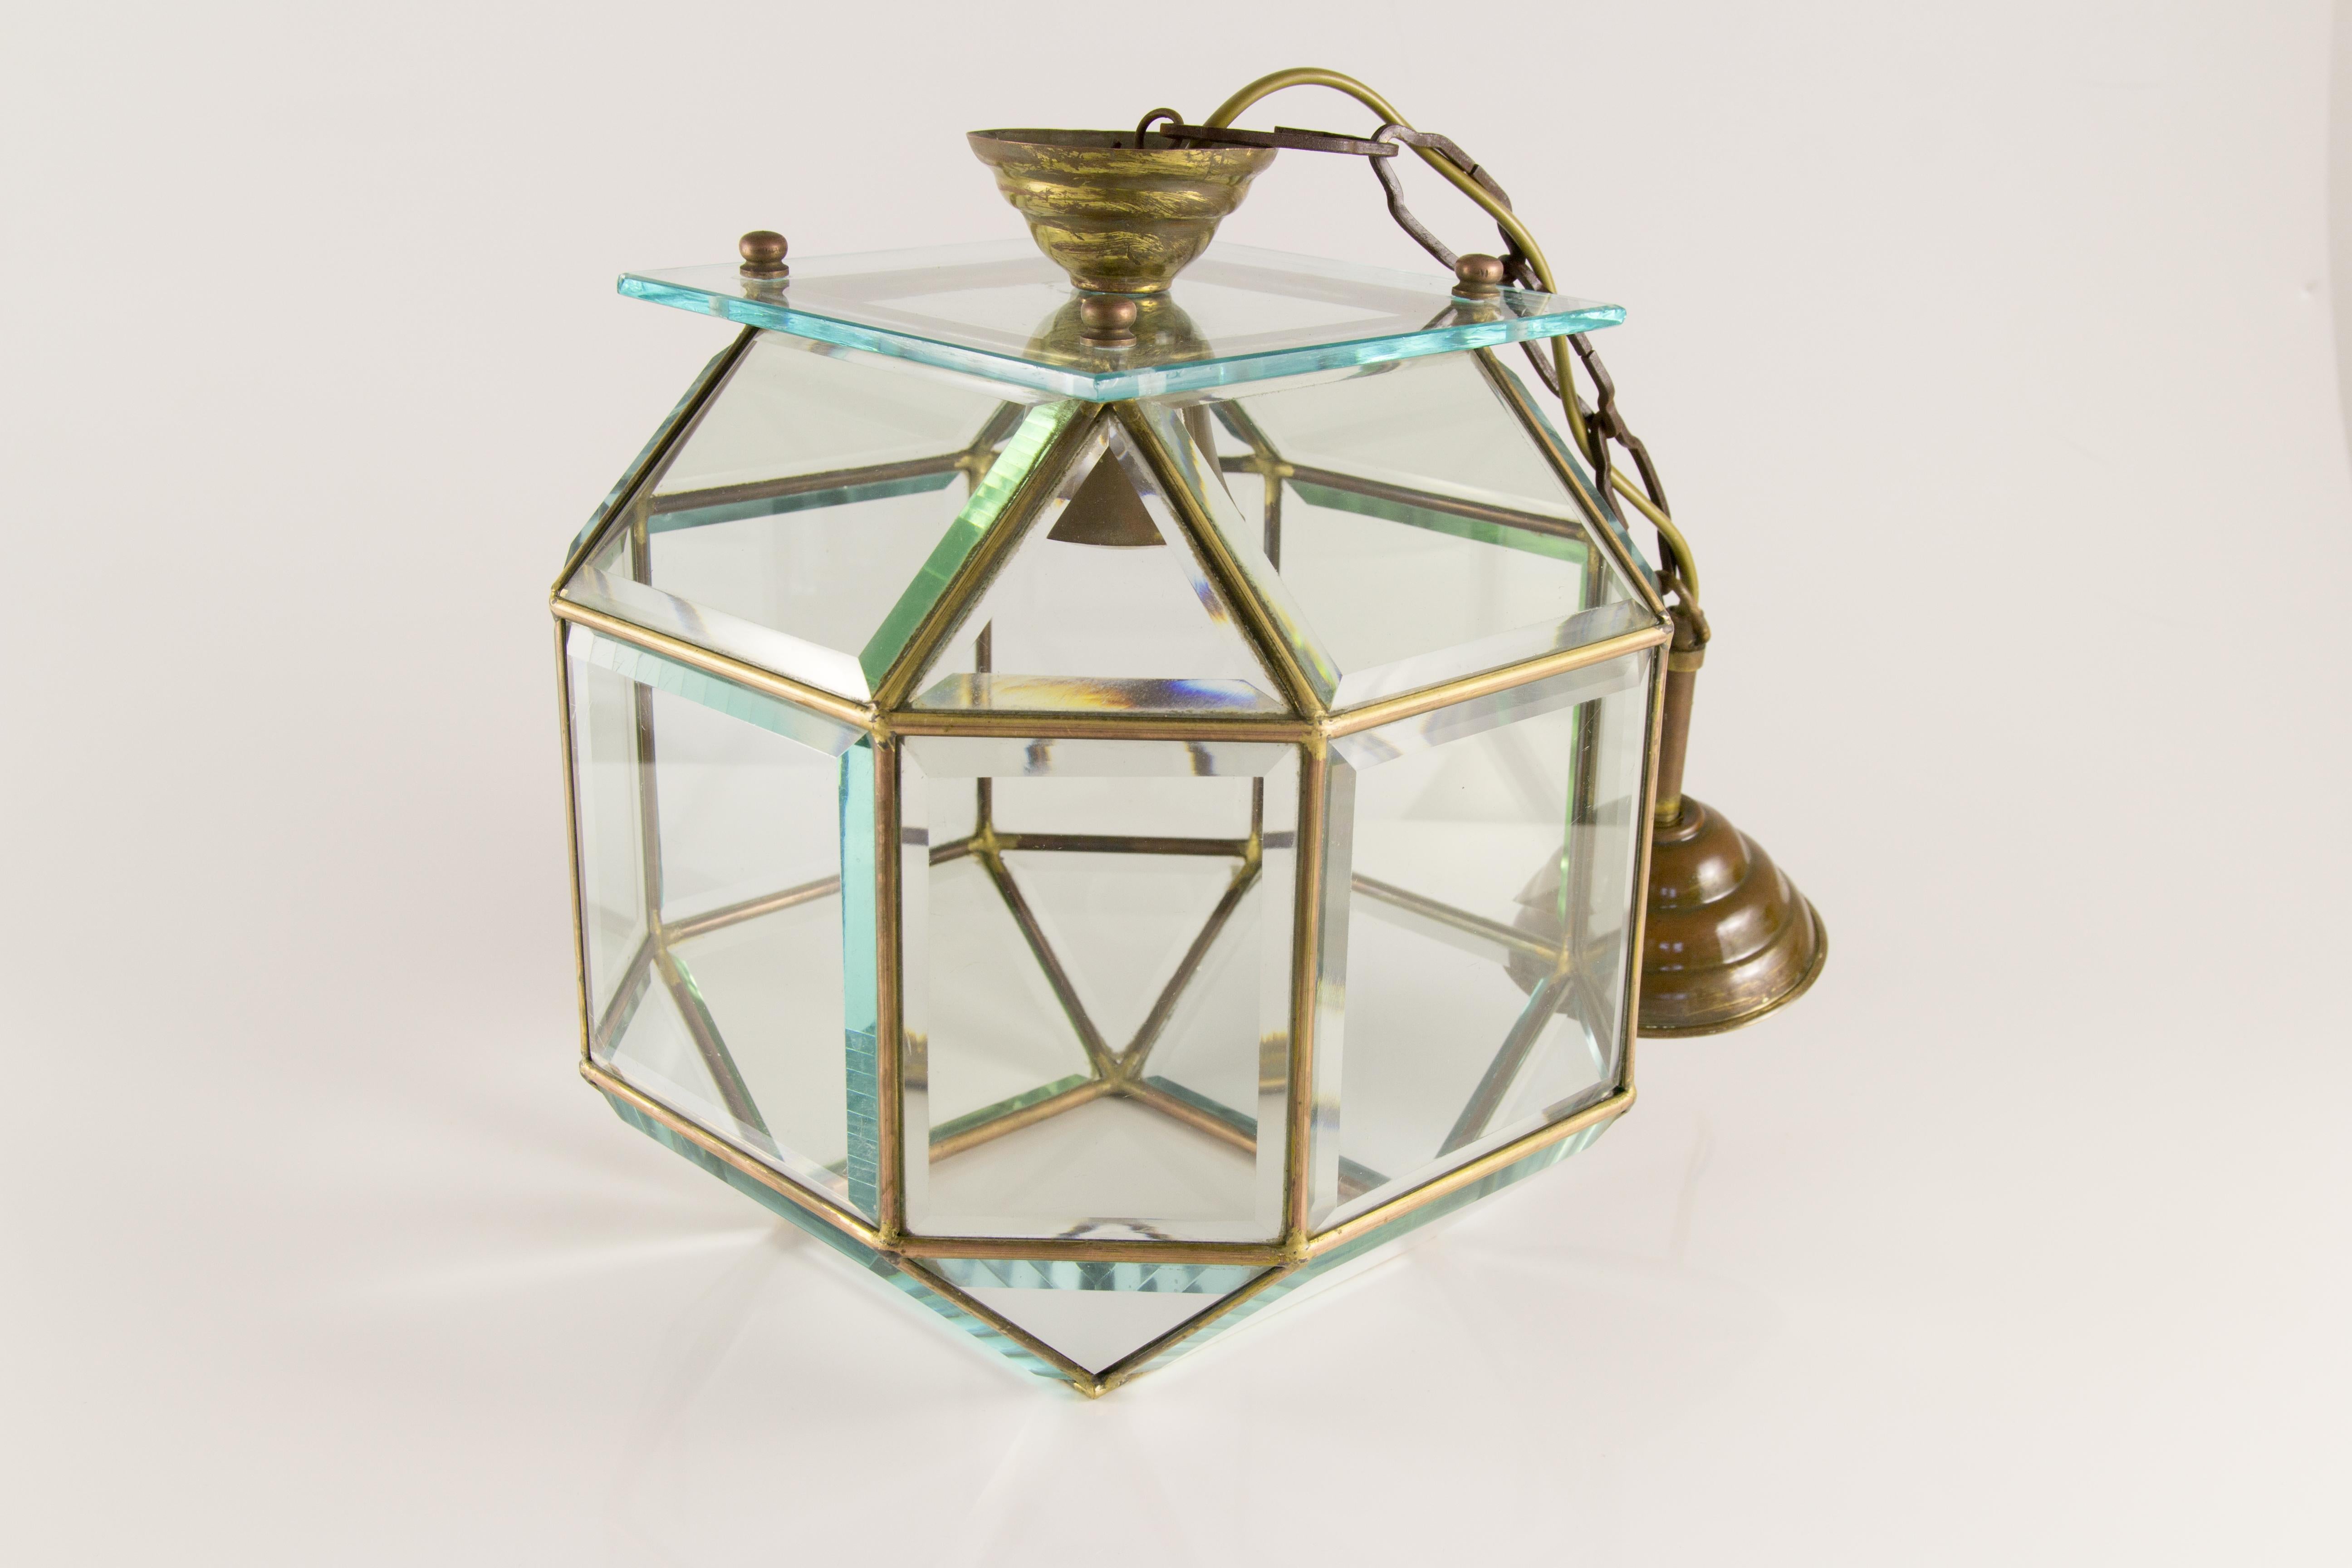 Italian Mid-Century Geometric Beveled Glass and Brass Pendant, 1950s For Sale 4